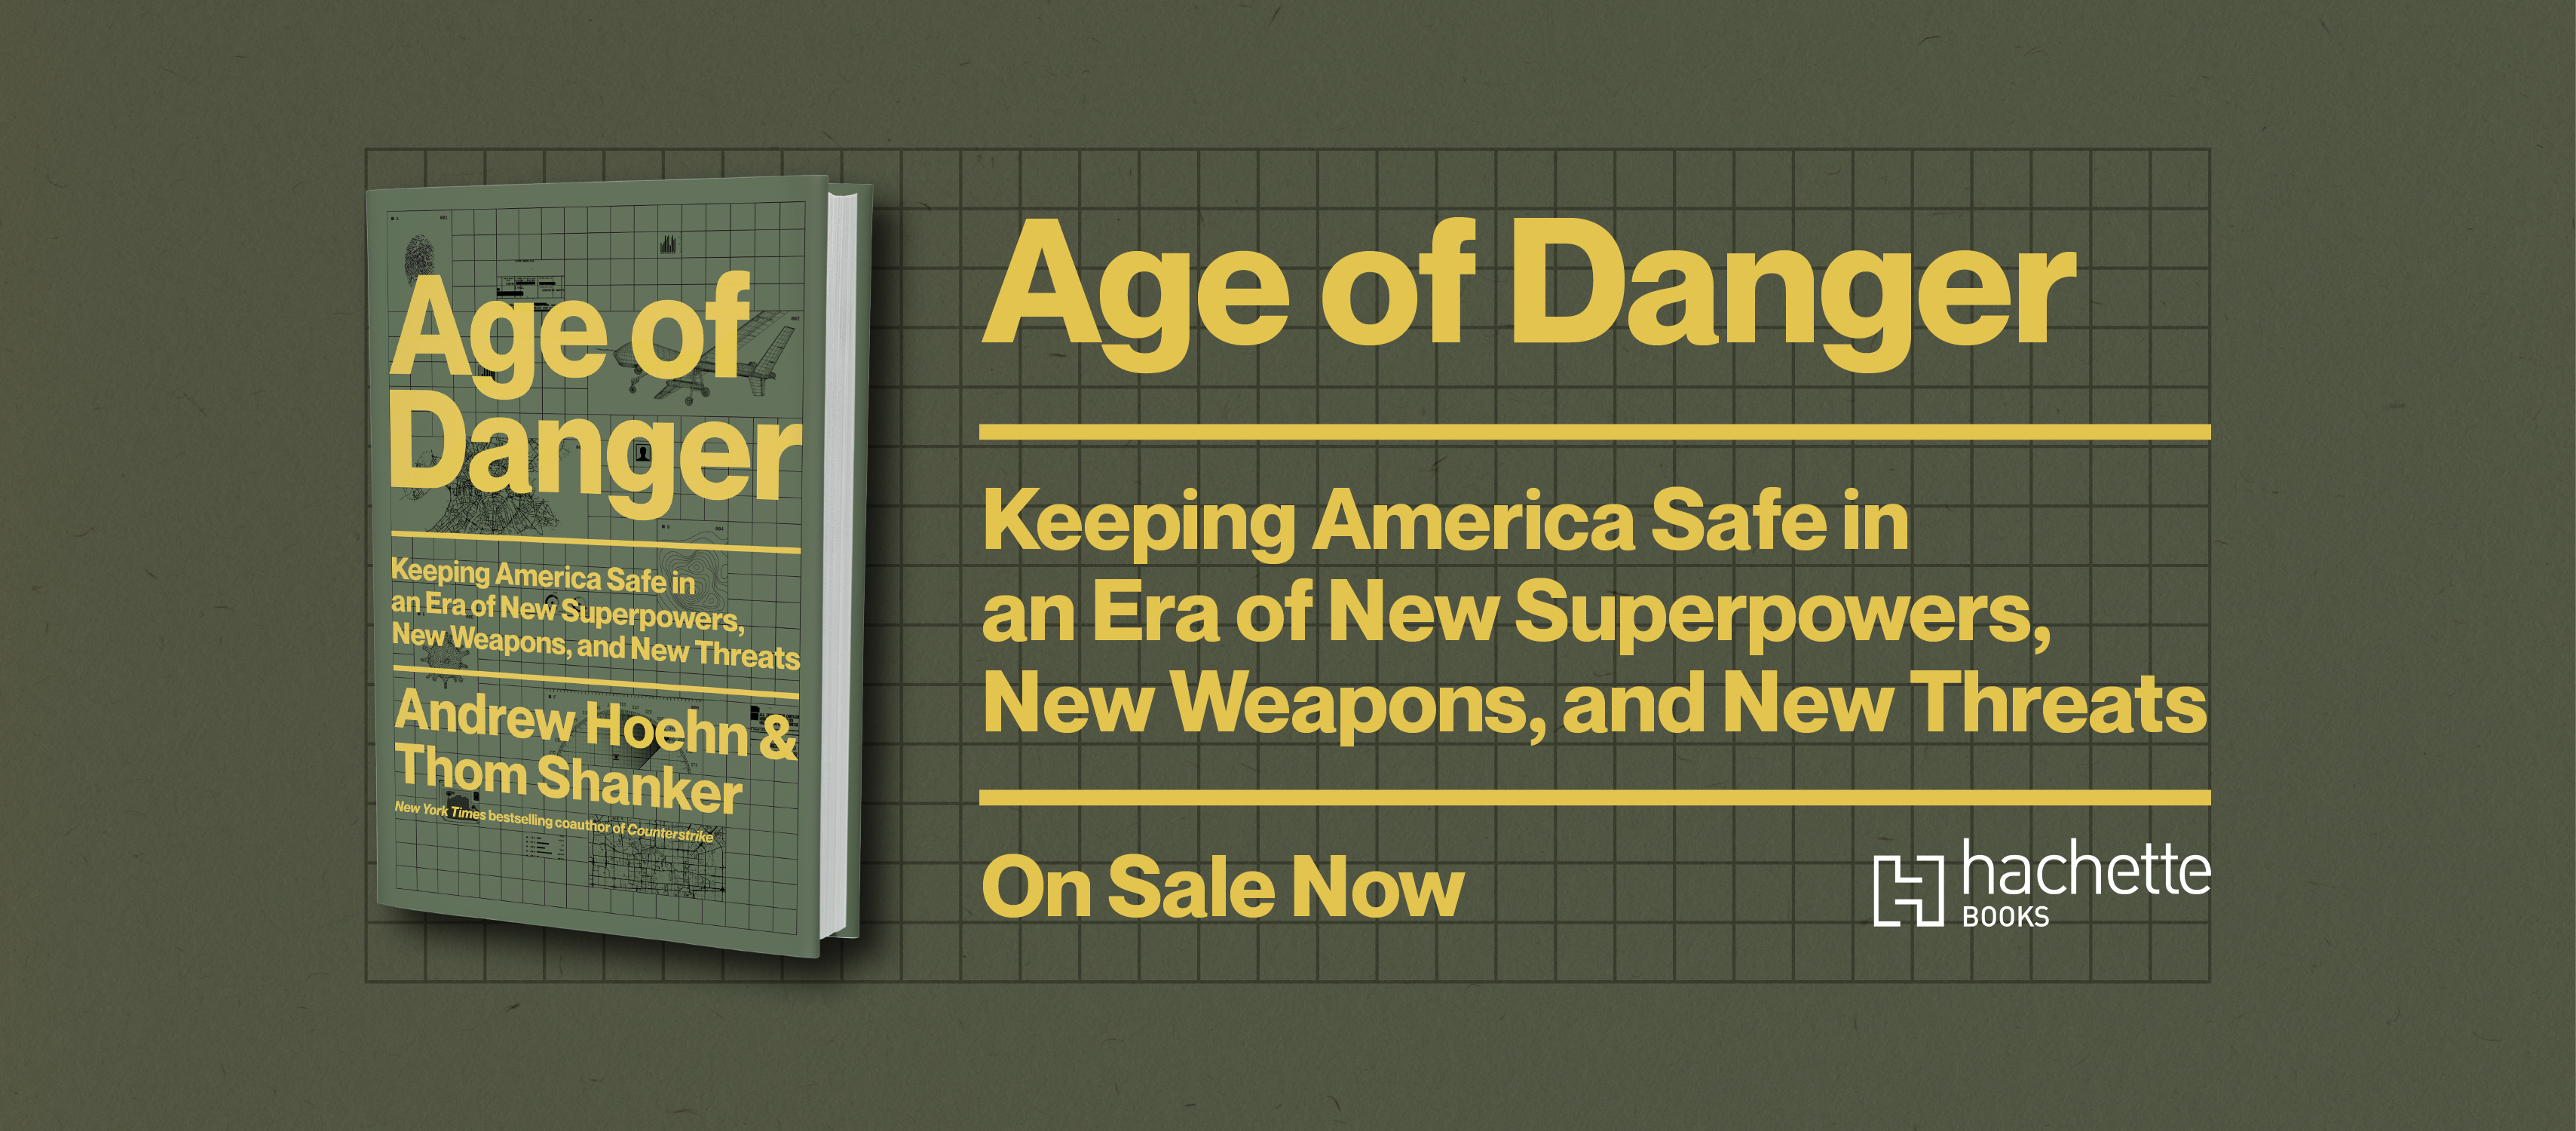 Age of Danger Book On Sale Now